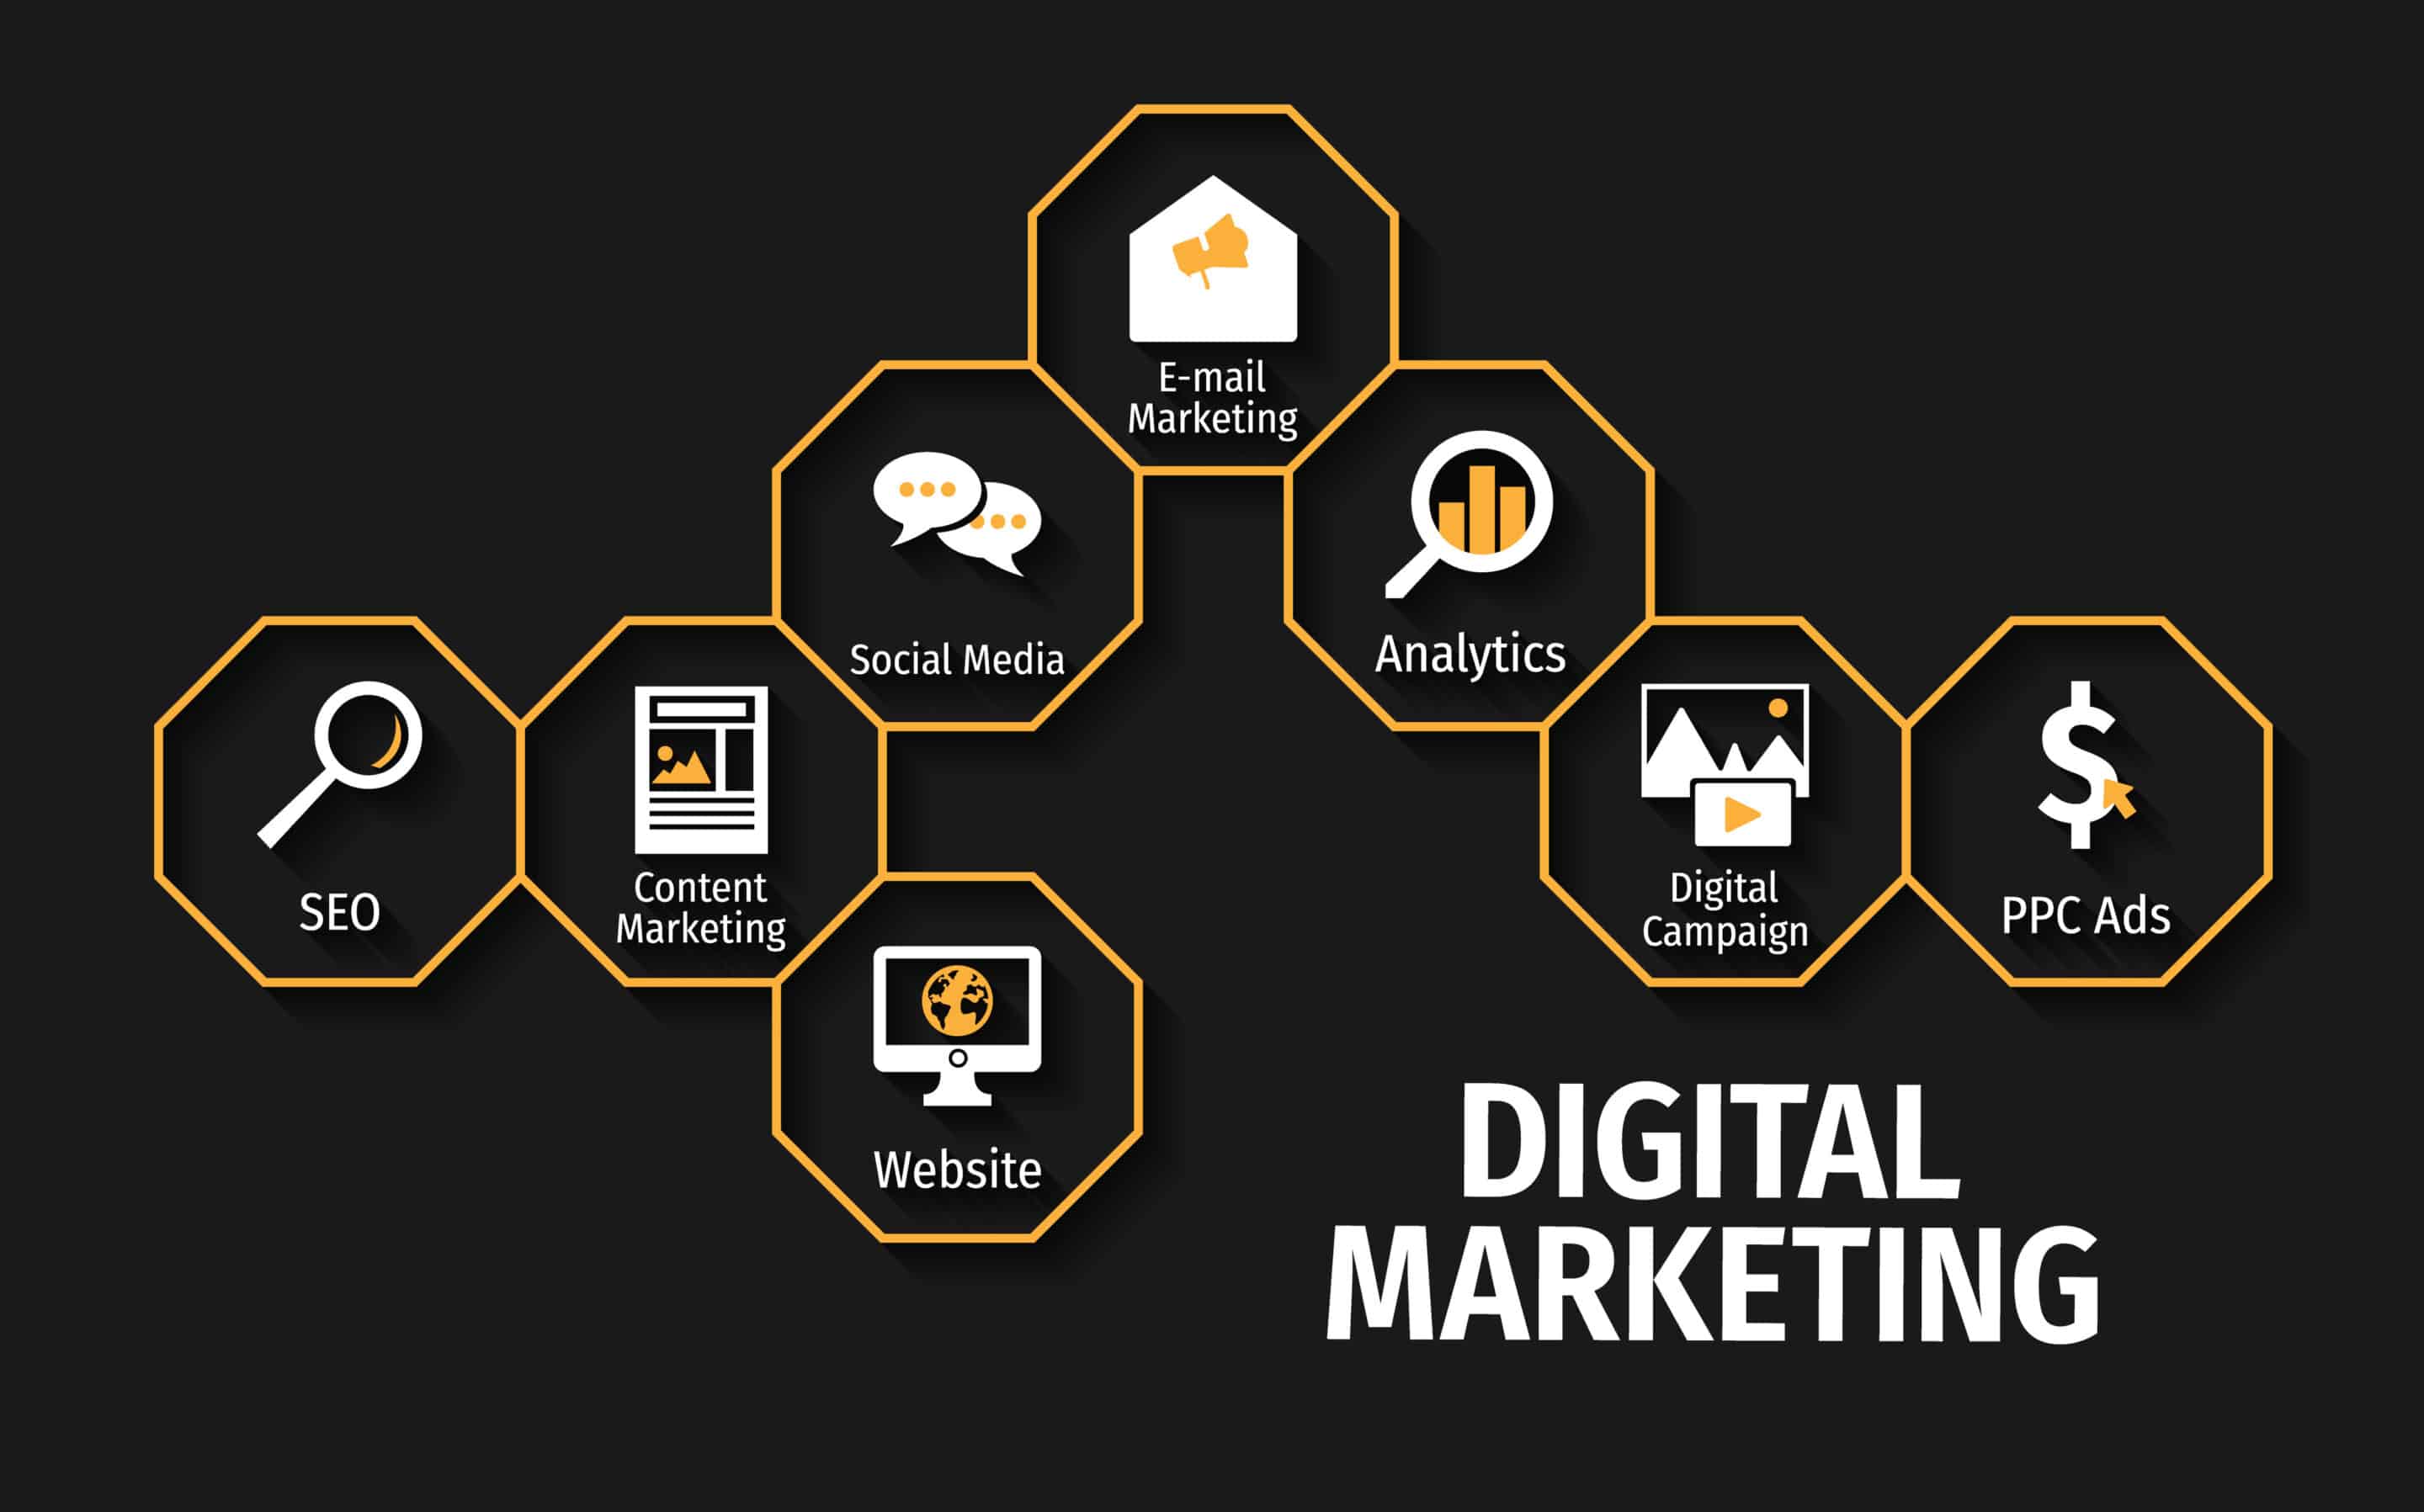 Let VMD Services take your practice to the next level in digital marketing.